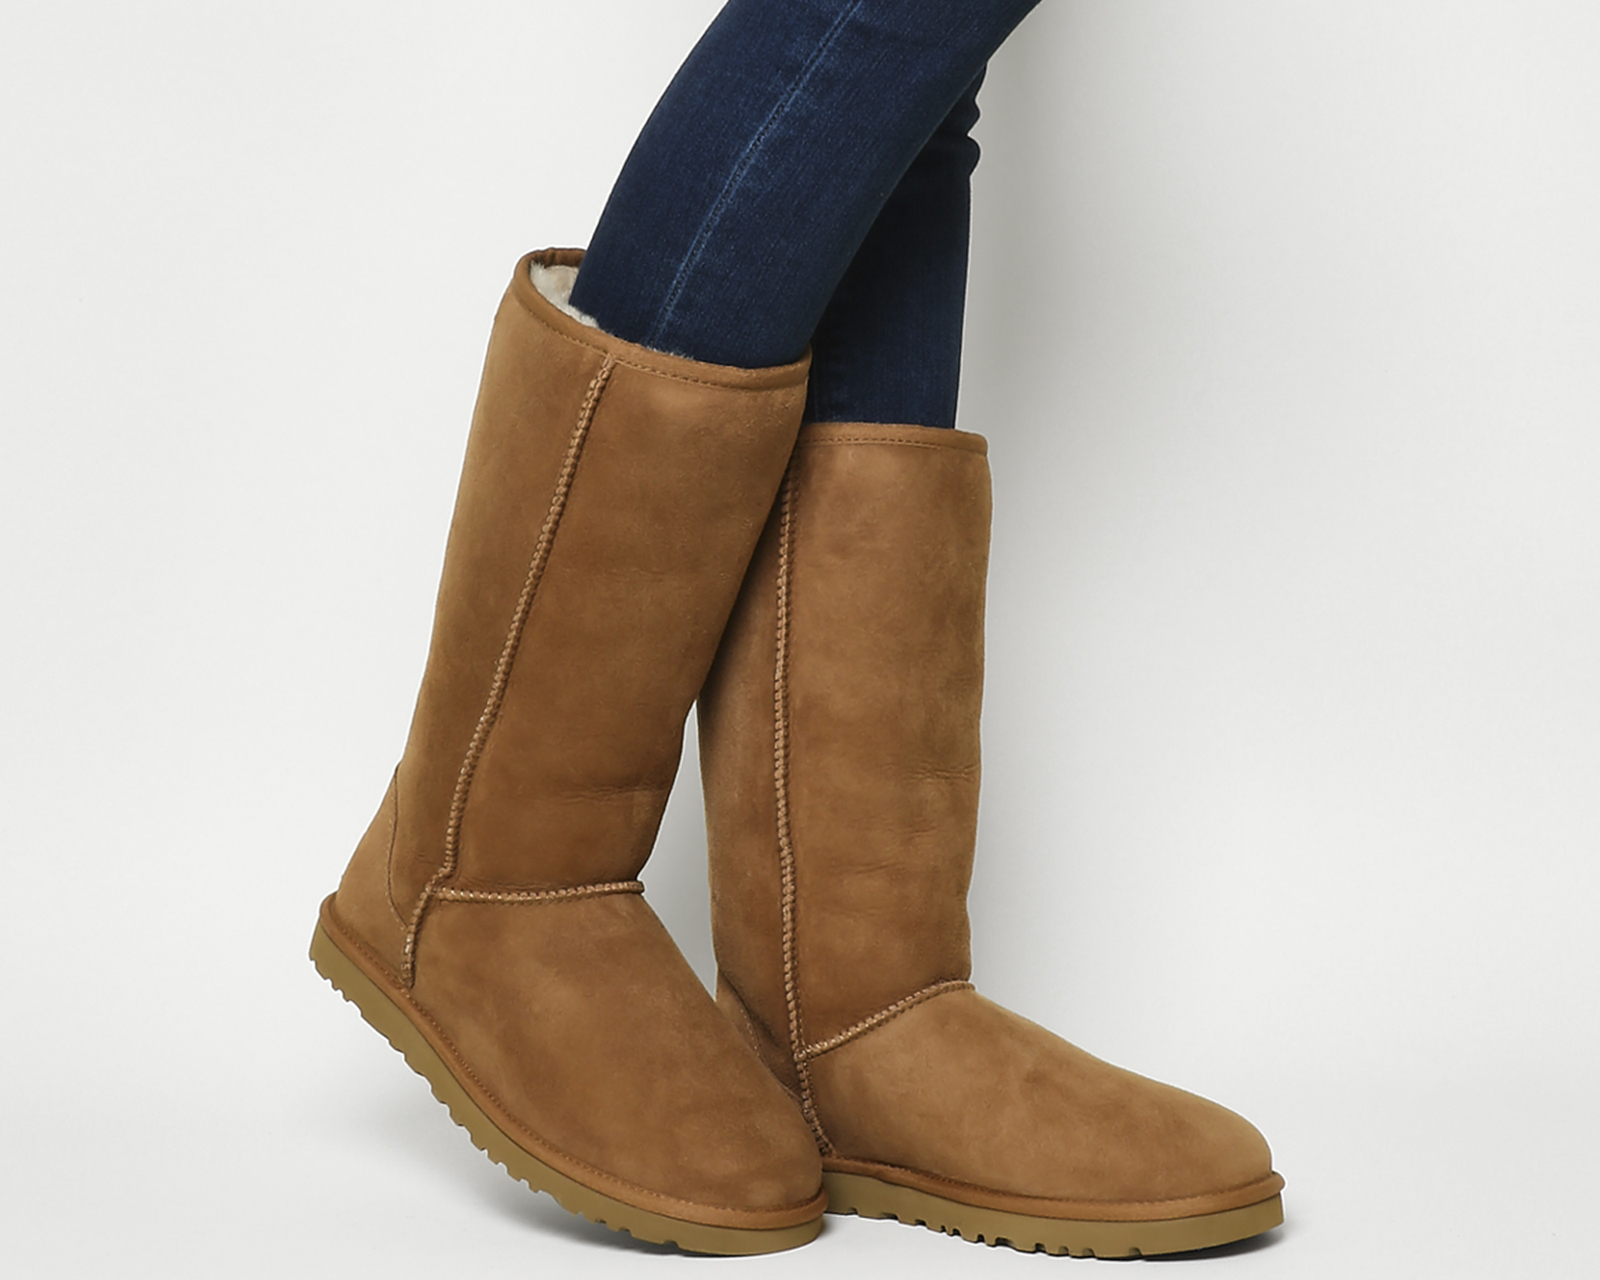 Ugg Tall Chestnut Boots Sale Outlet, SAVE 31% - colaisteanatha.ie